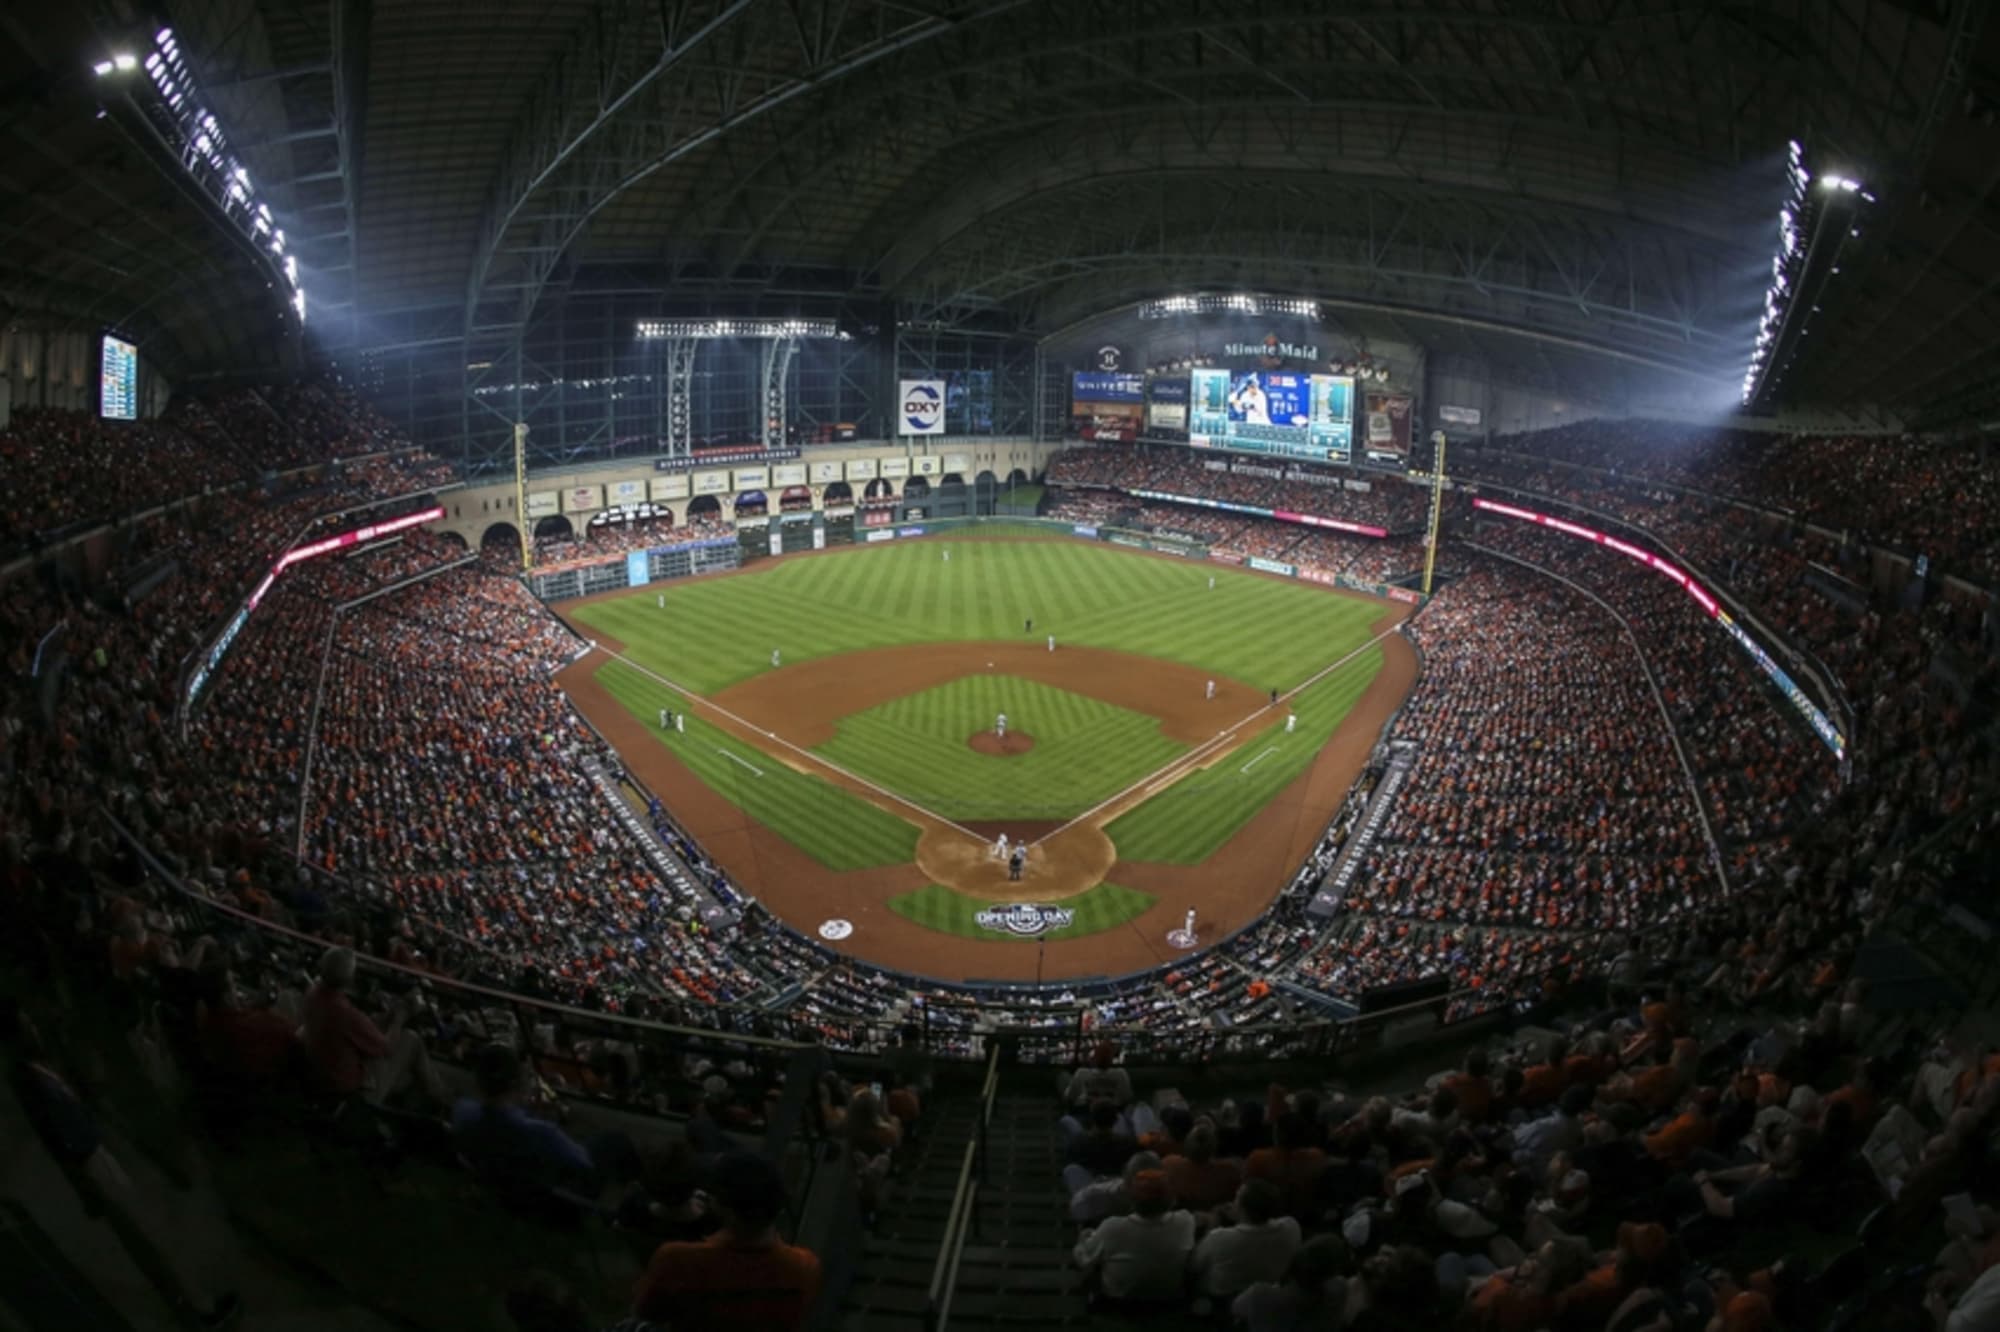 Houston Astros open Minute Maid Park for individual player